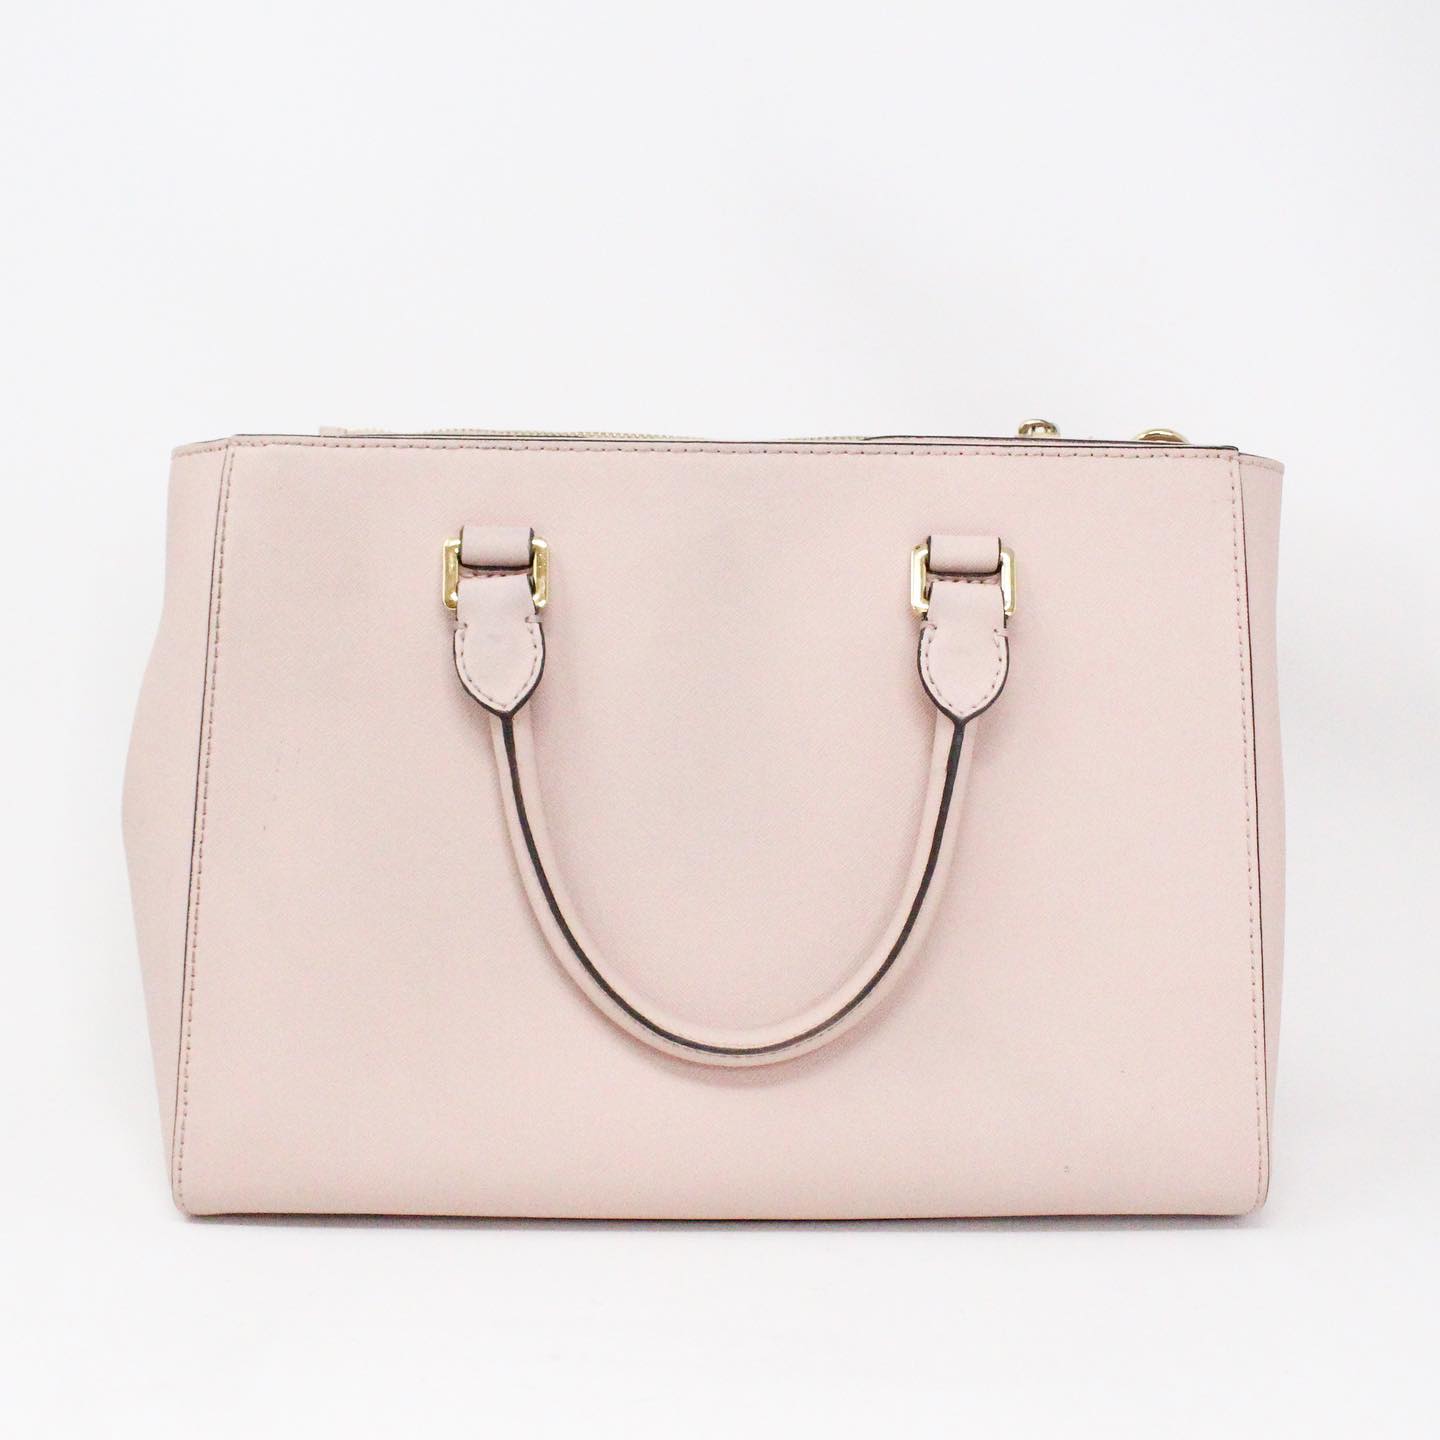 MICHAEL KORS #36063 Blush Pink Saffiano Leather Handbag with Strap – ALL  YOUR BLISS